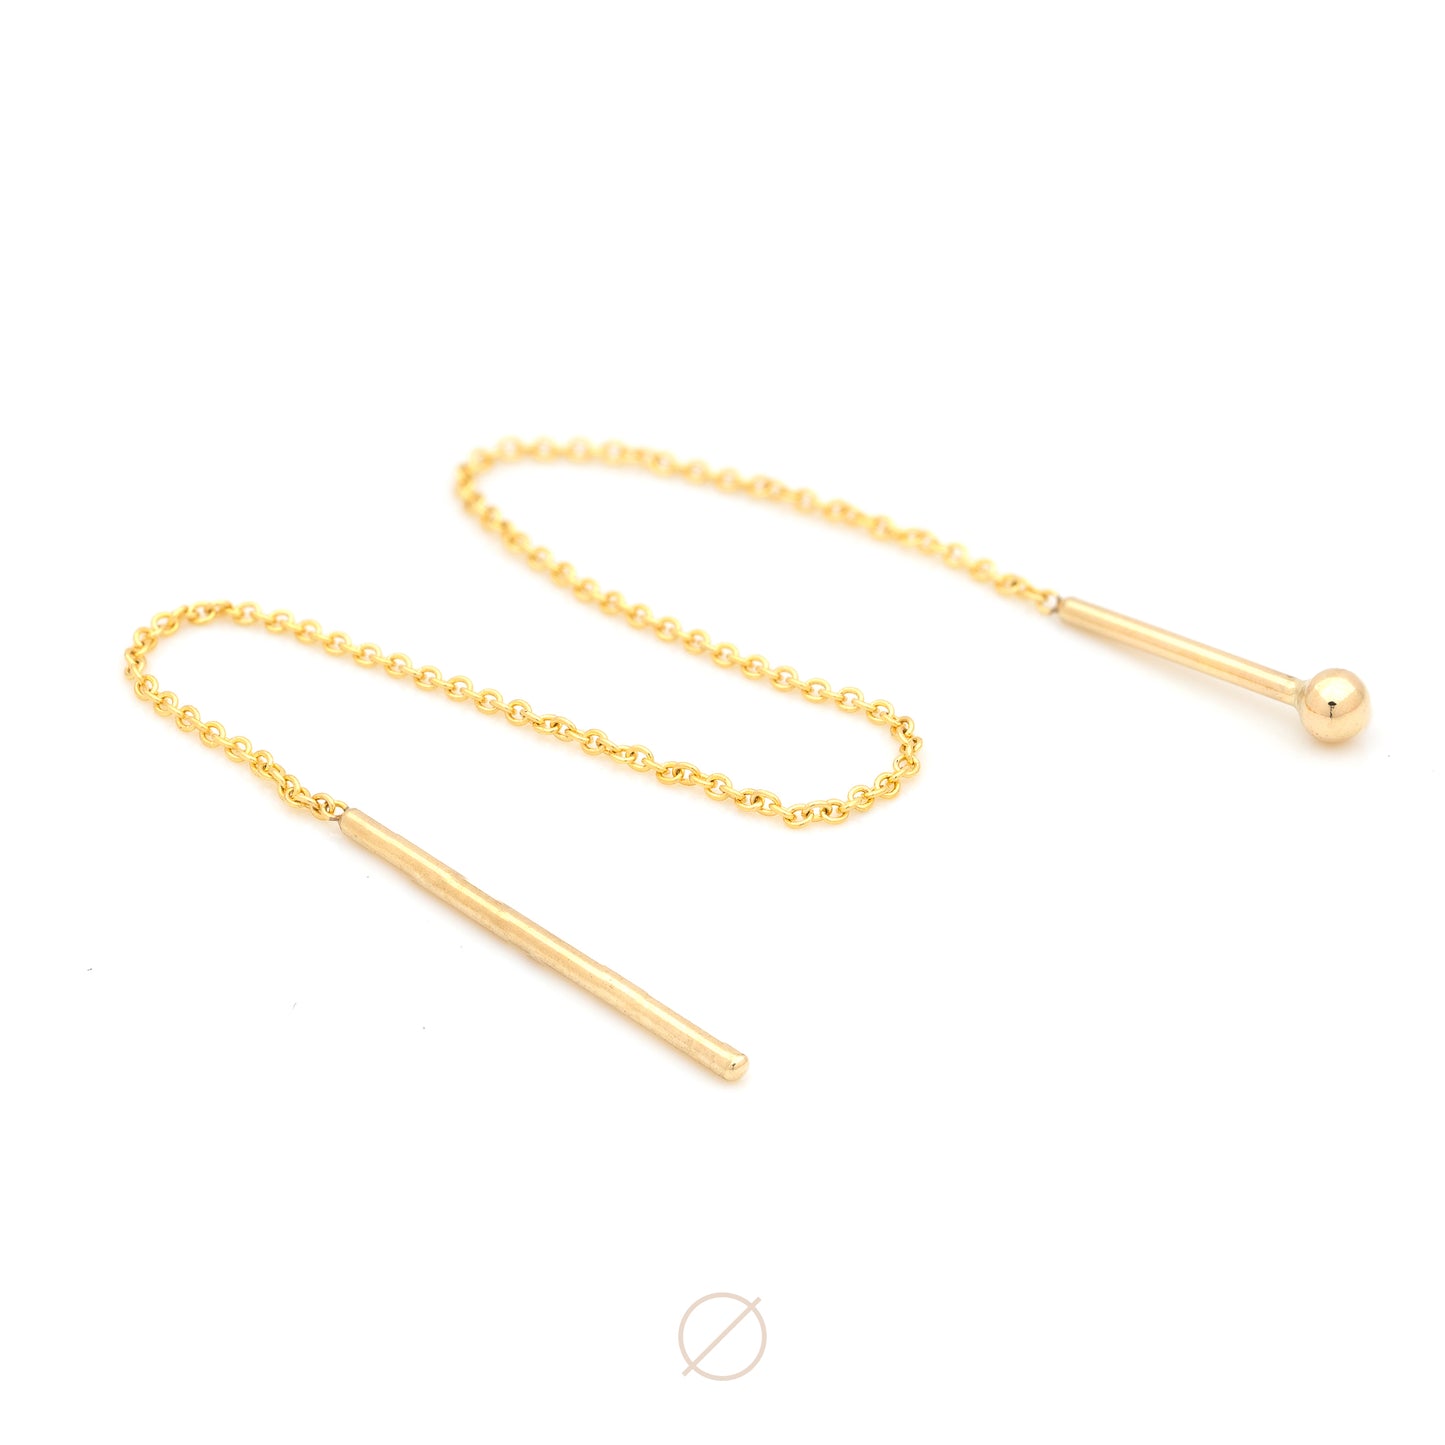 Chain Threader in Yellow Gold by Jack + G